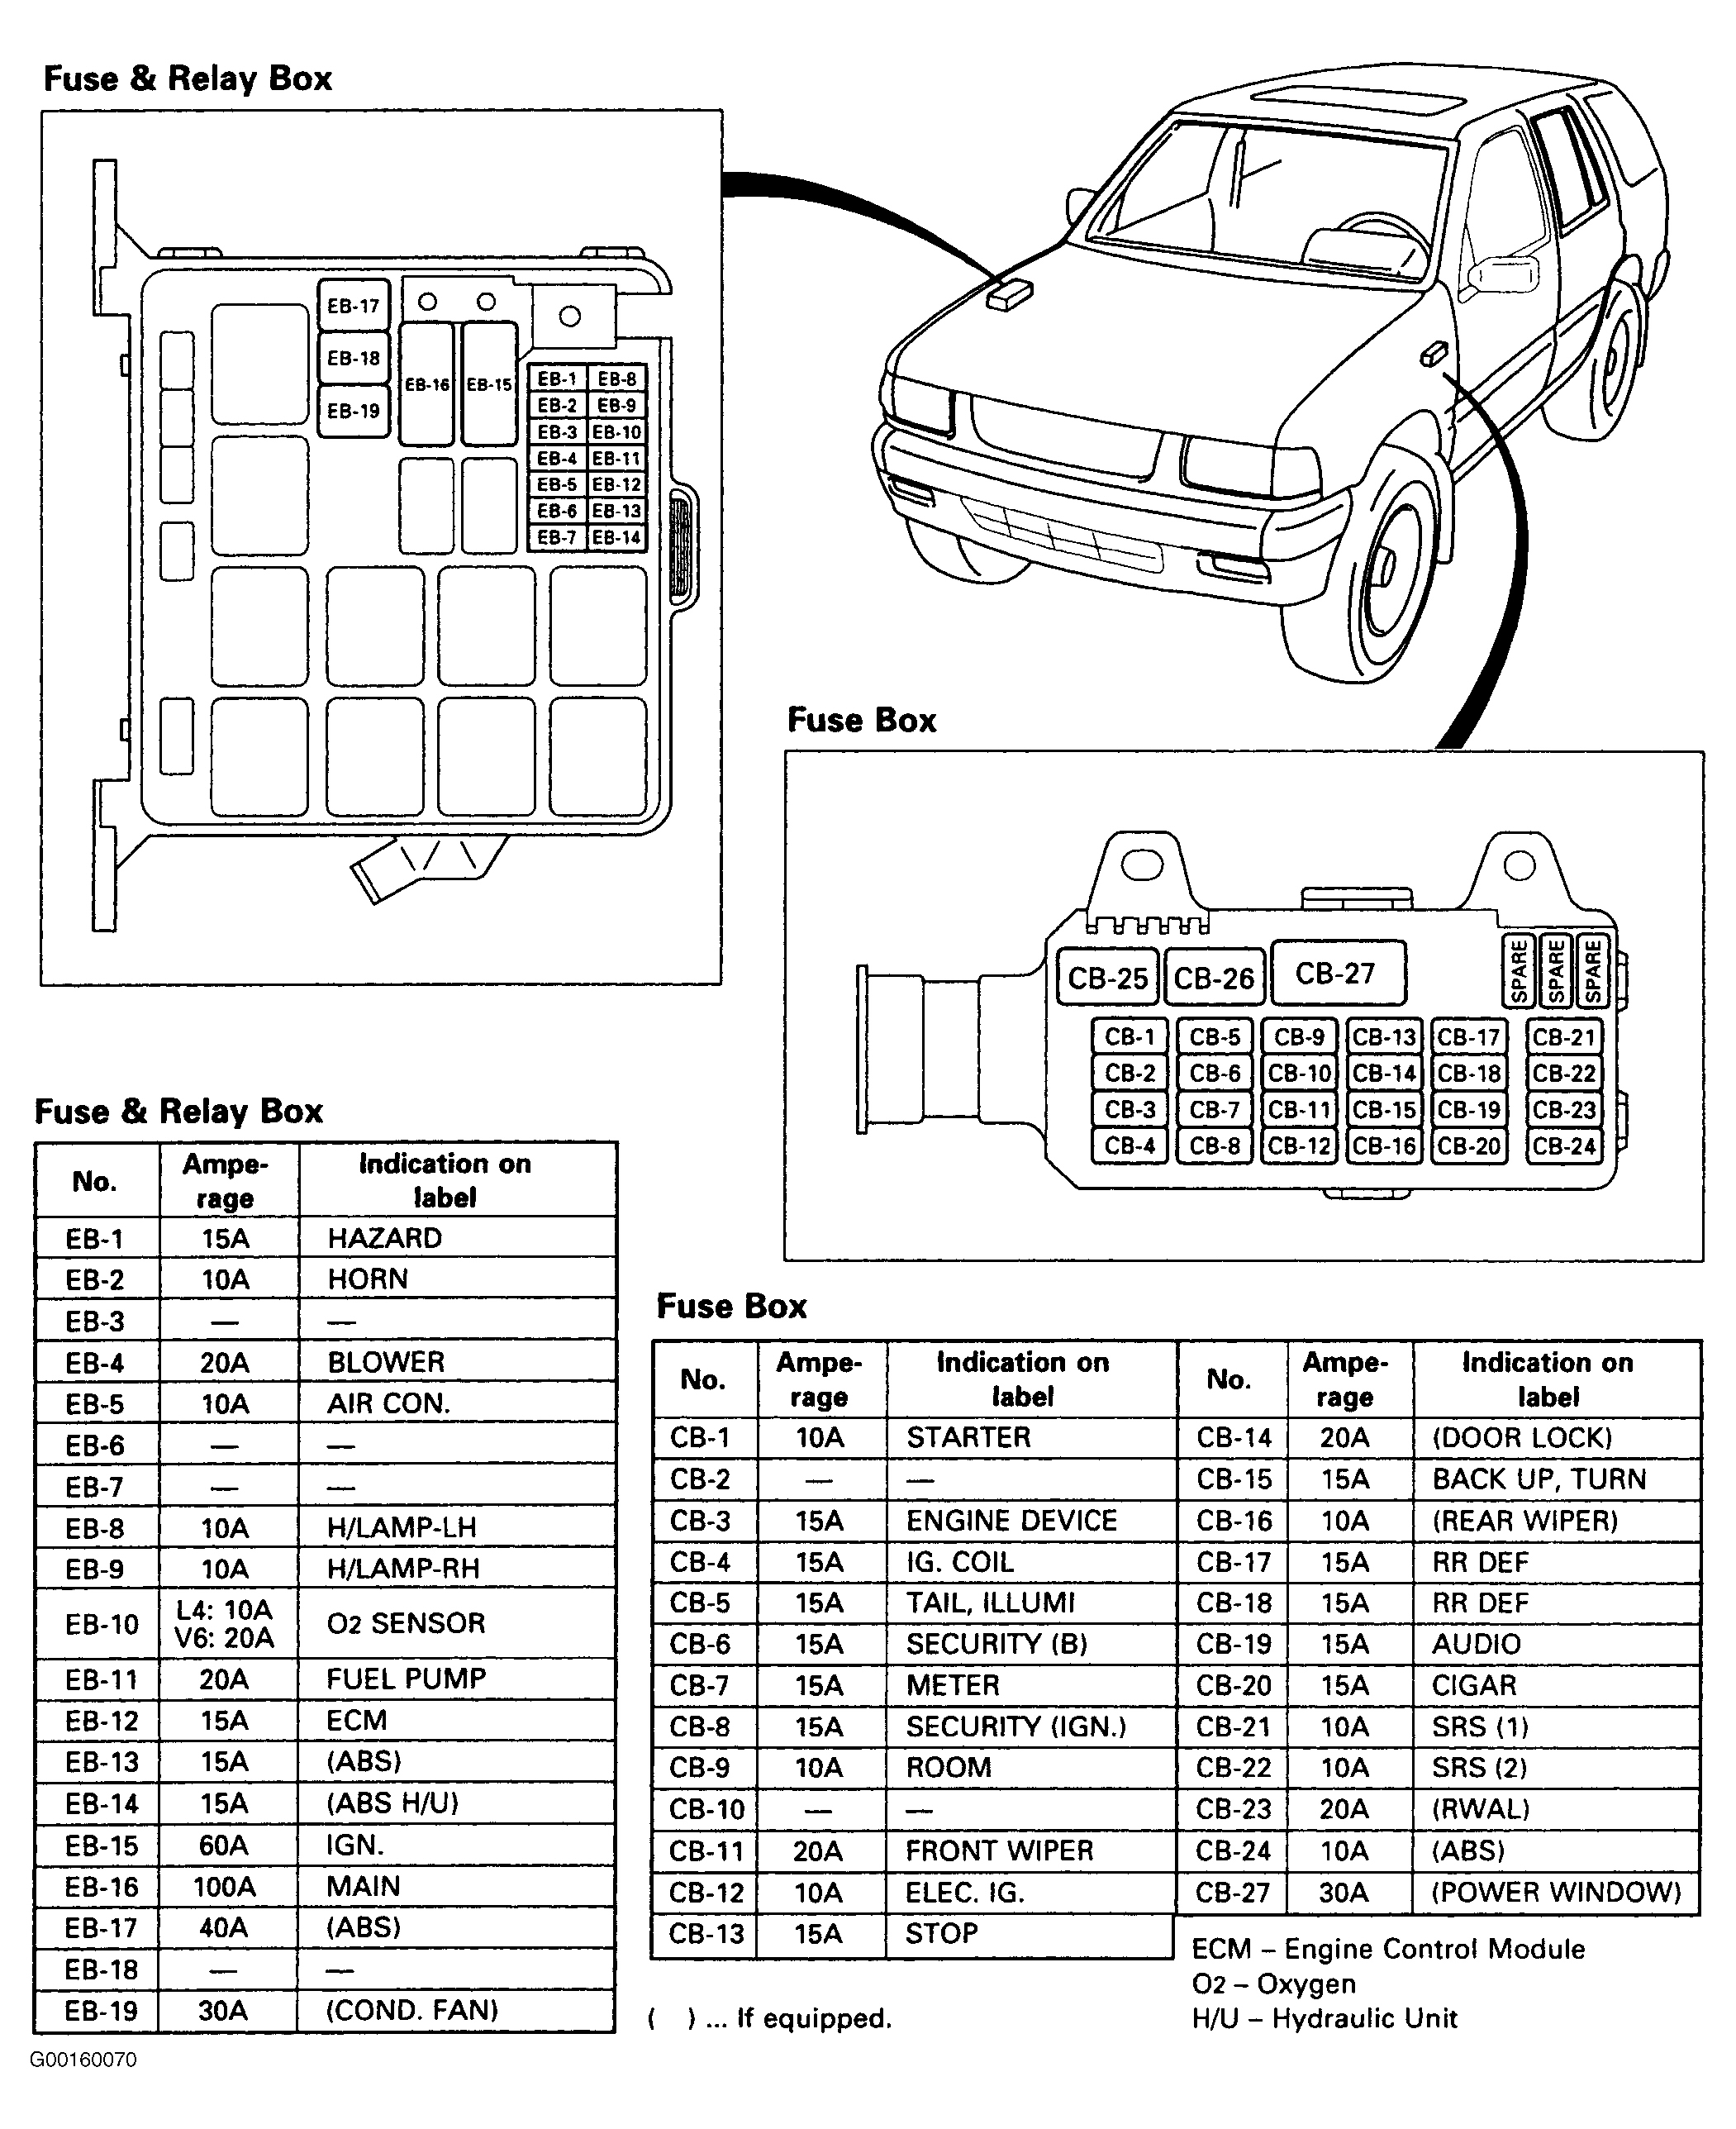 Isuzu Rodeo S 1996 - Component Locations -  Identifying Fuse & Relay Box, & Fuse Box Locations